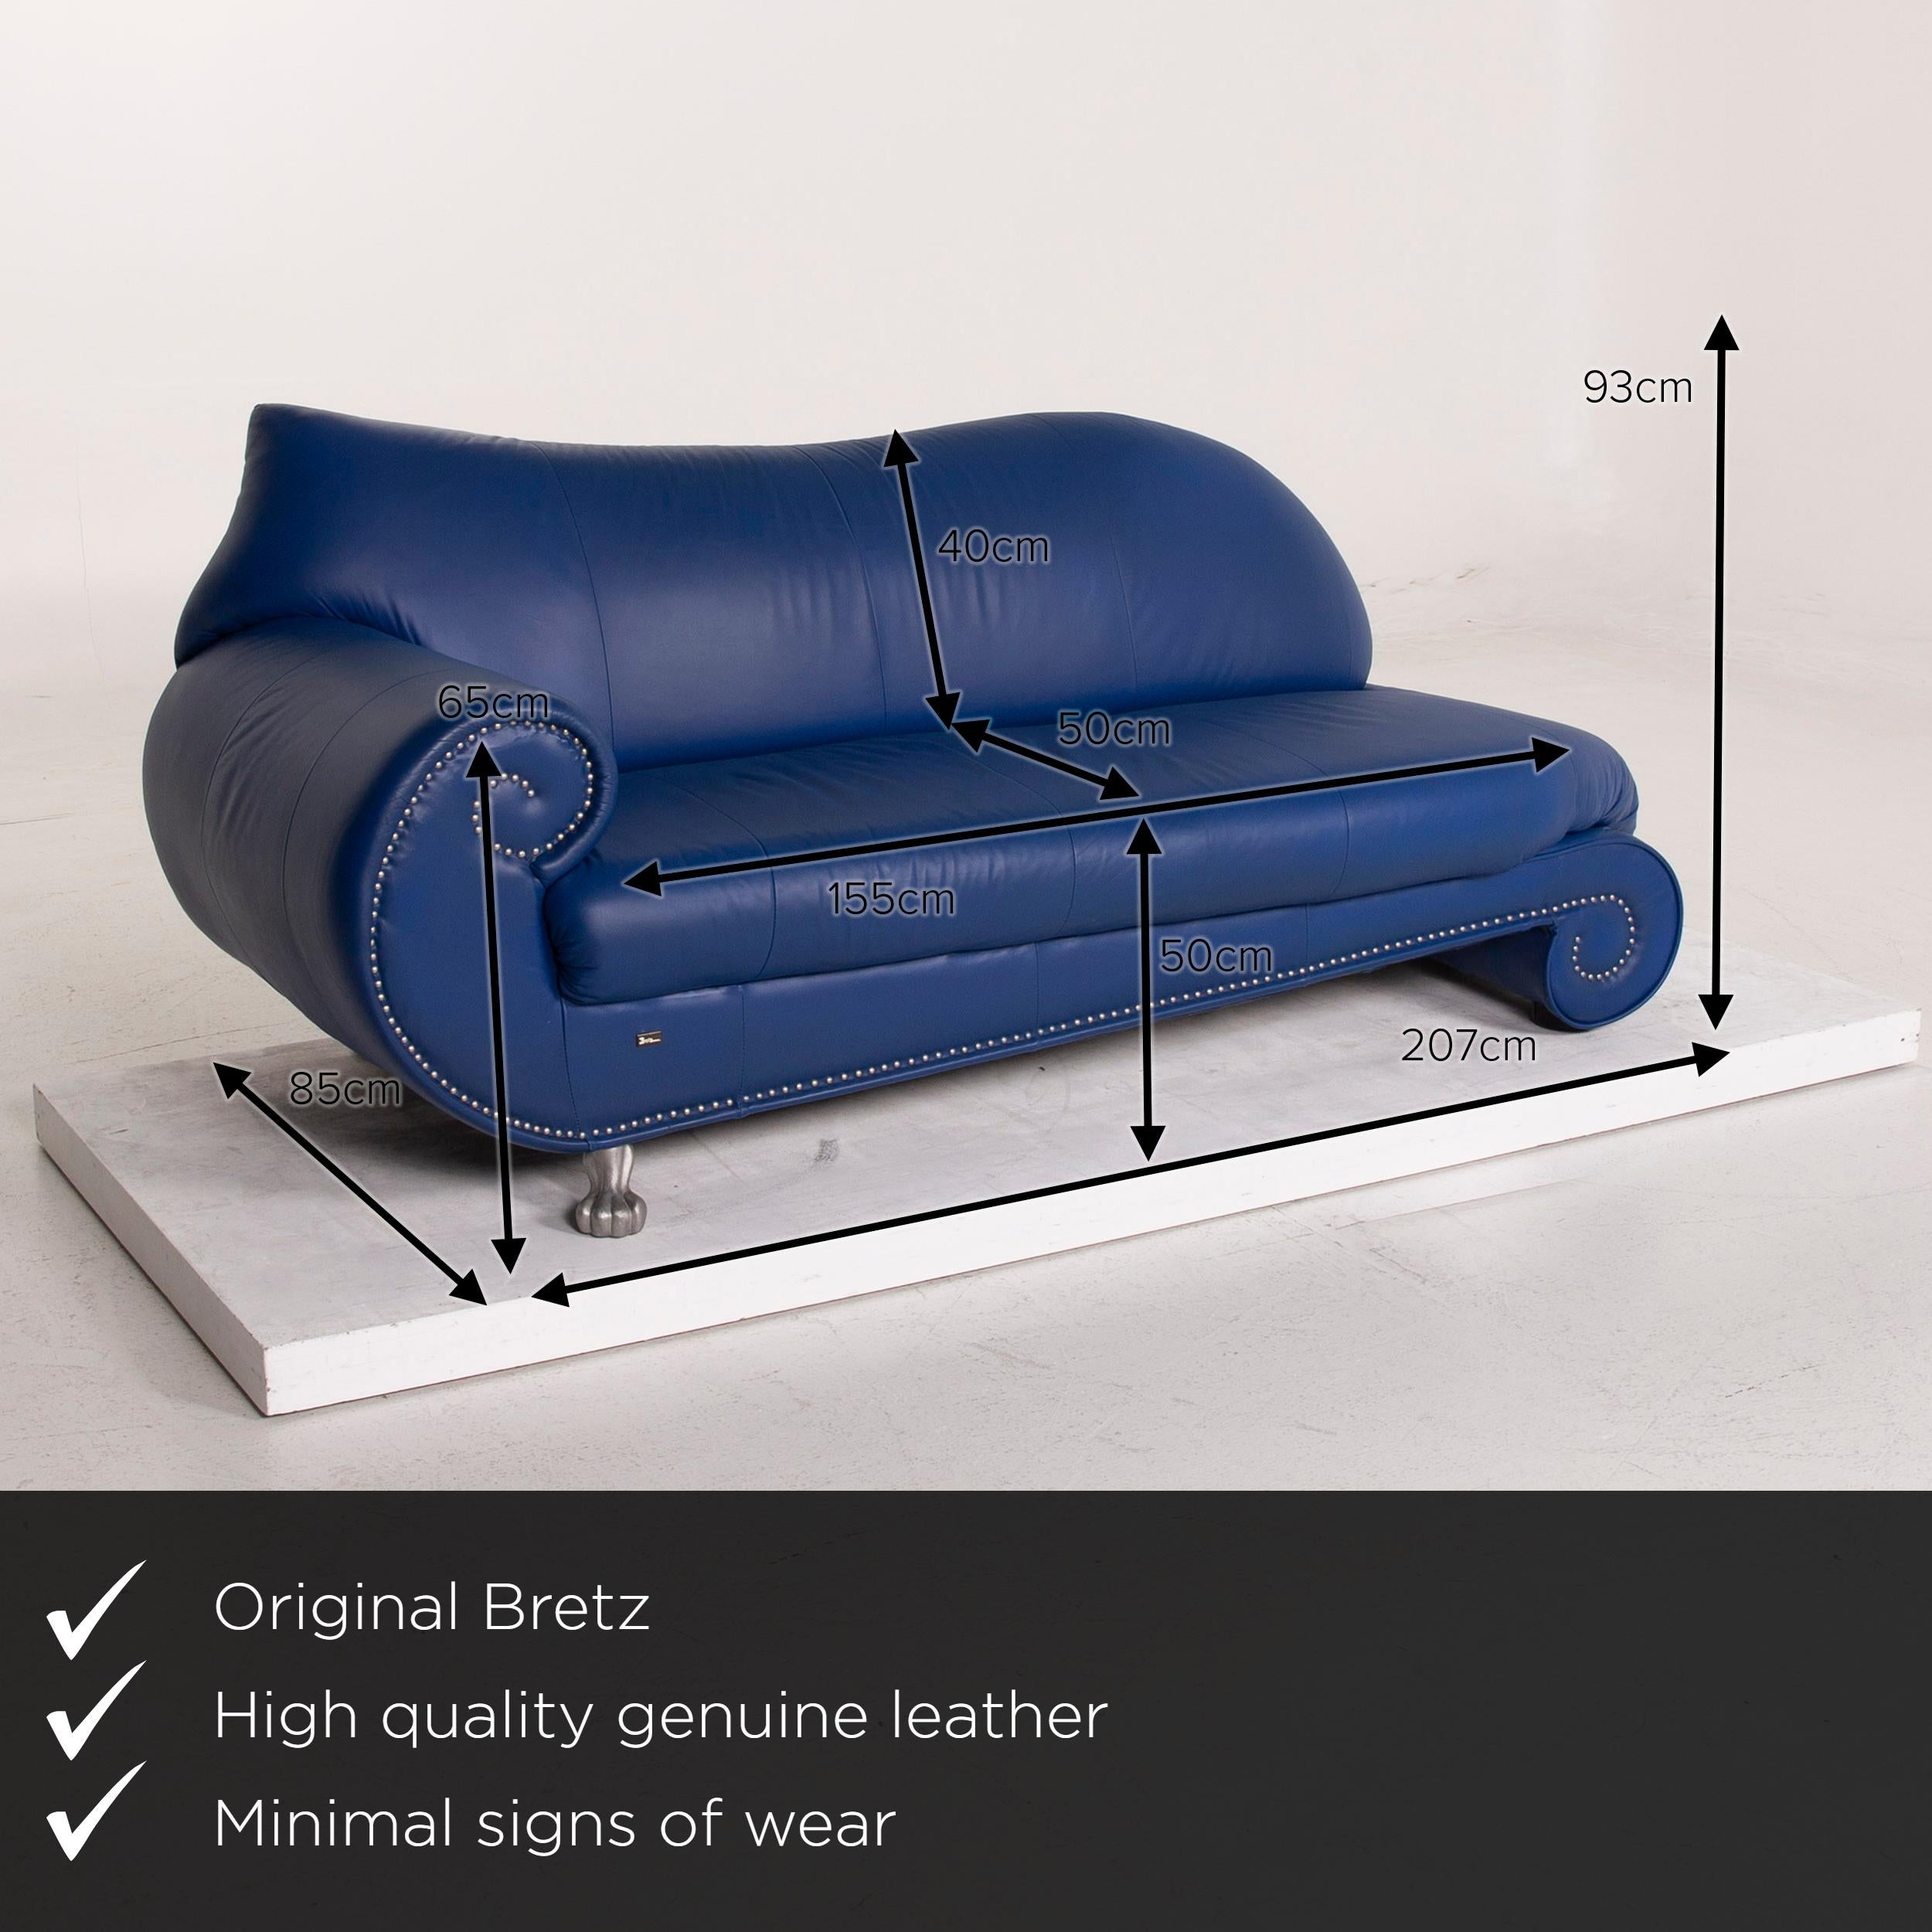 We present to you a Bretz Gaudi leather sofa blue three-seat.


 Product measurements in centimeters:
 

Depth 85
Width 207
Height 93
Seat height 50
Rest height 65
Seat depth 50
Seat width 155
Back height 40.

 